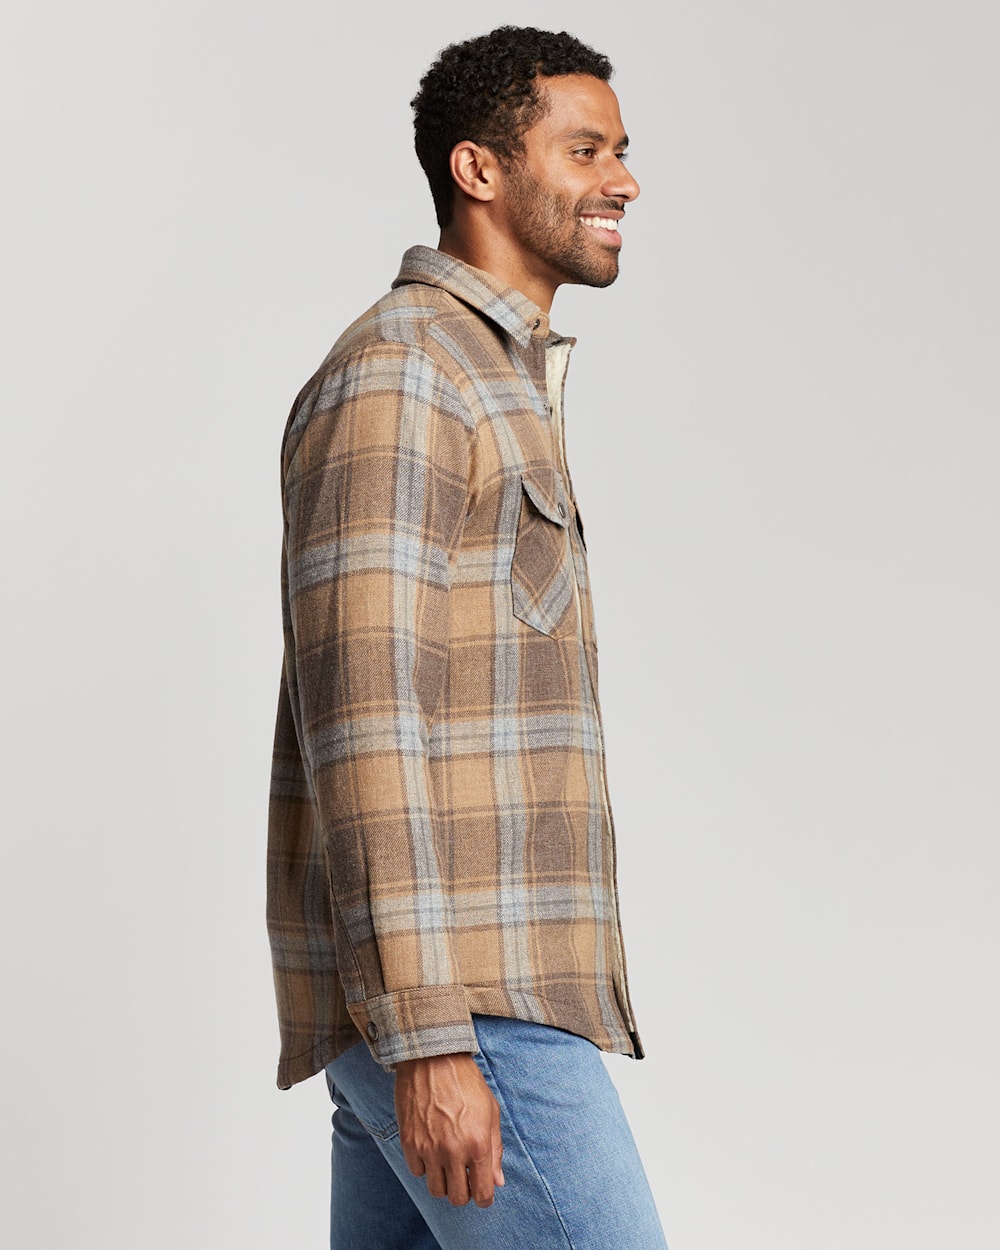 ALTERNATE VIEW OF MEN'S SHERPA-LINED WOOL SHIRT JACKET IN TAN/GREY PLAID image number 2